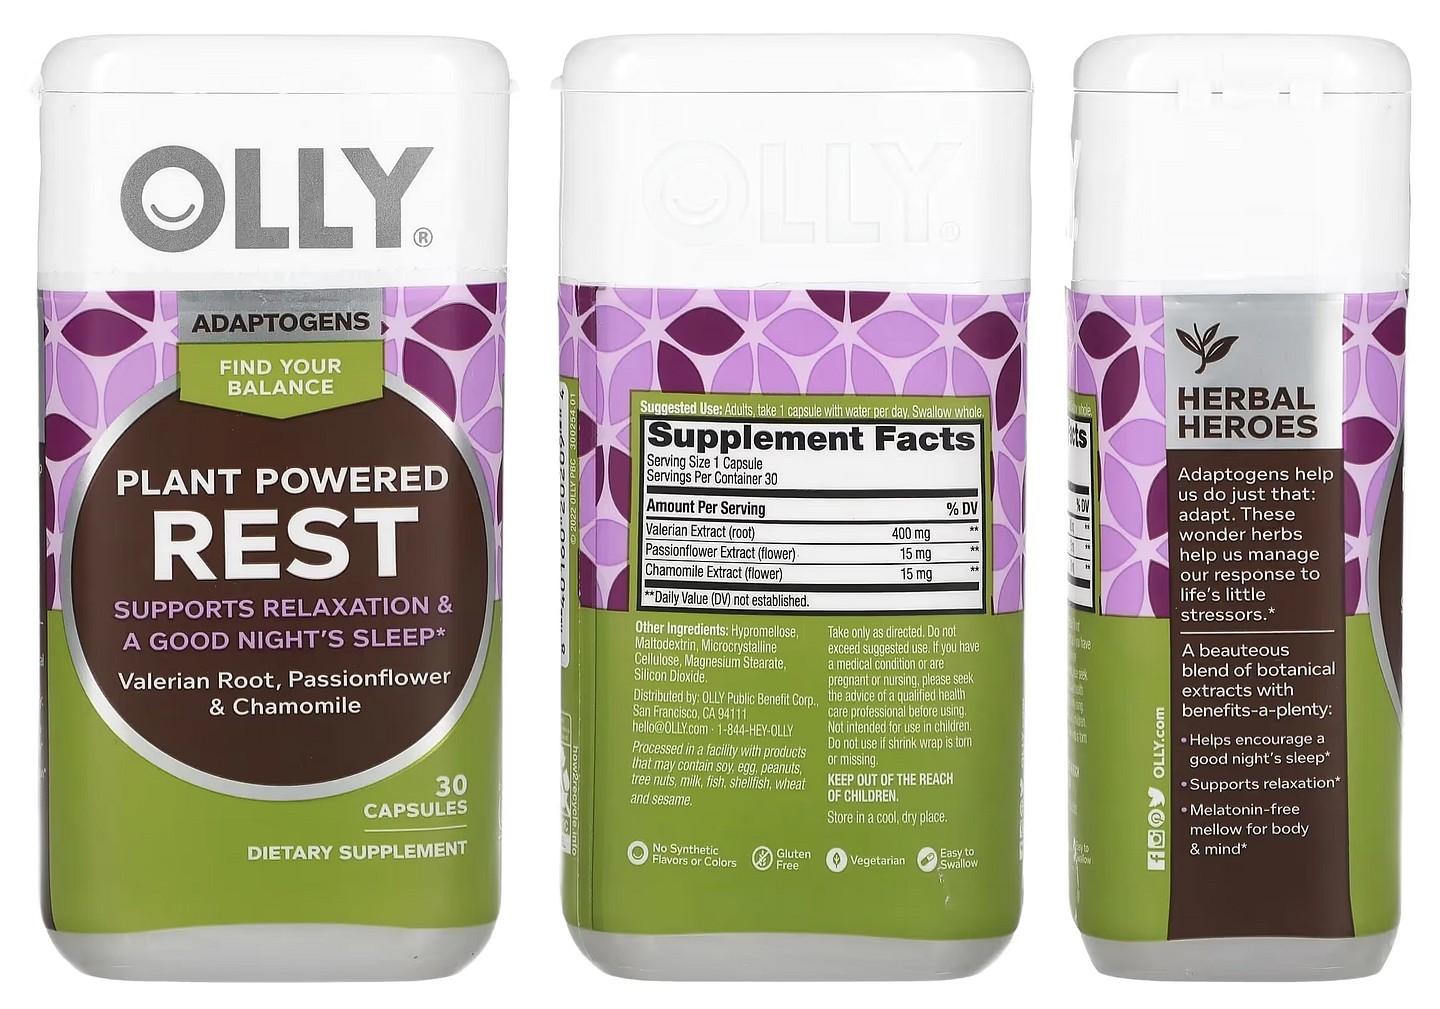 OLLY, Plant Powered Rest packaging